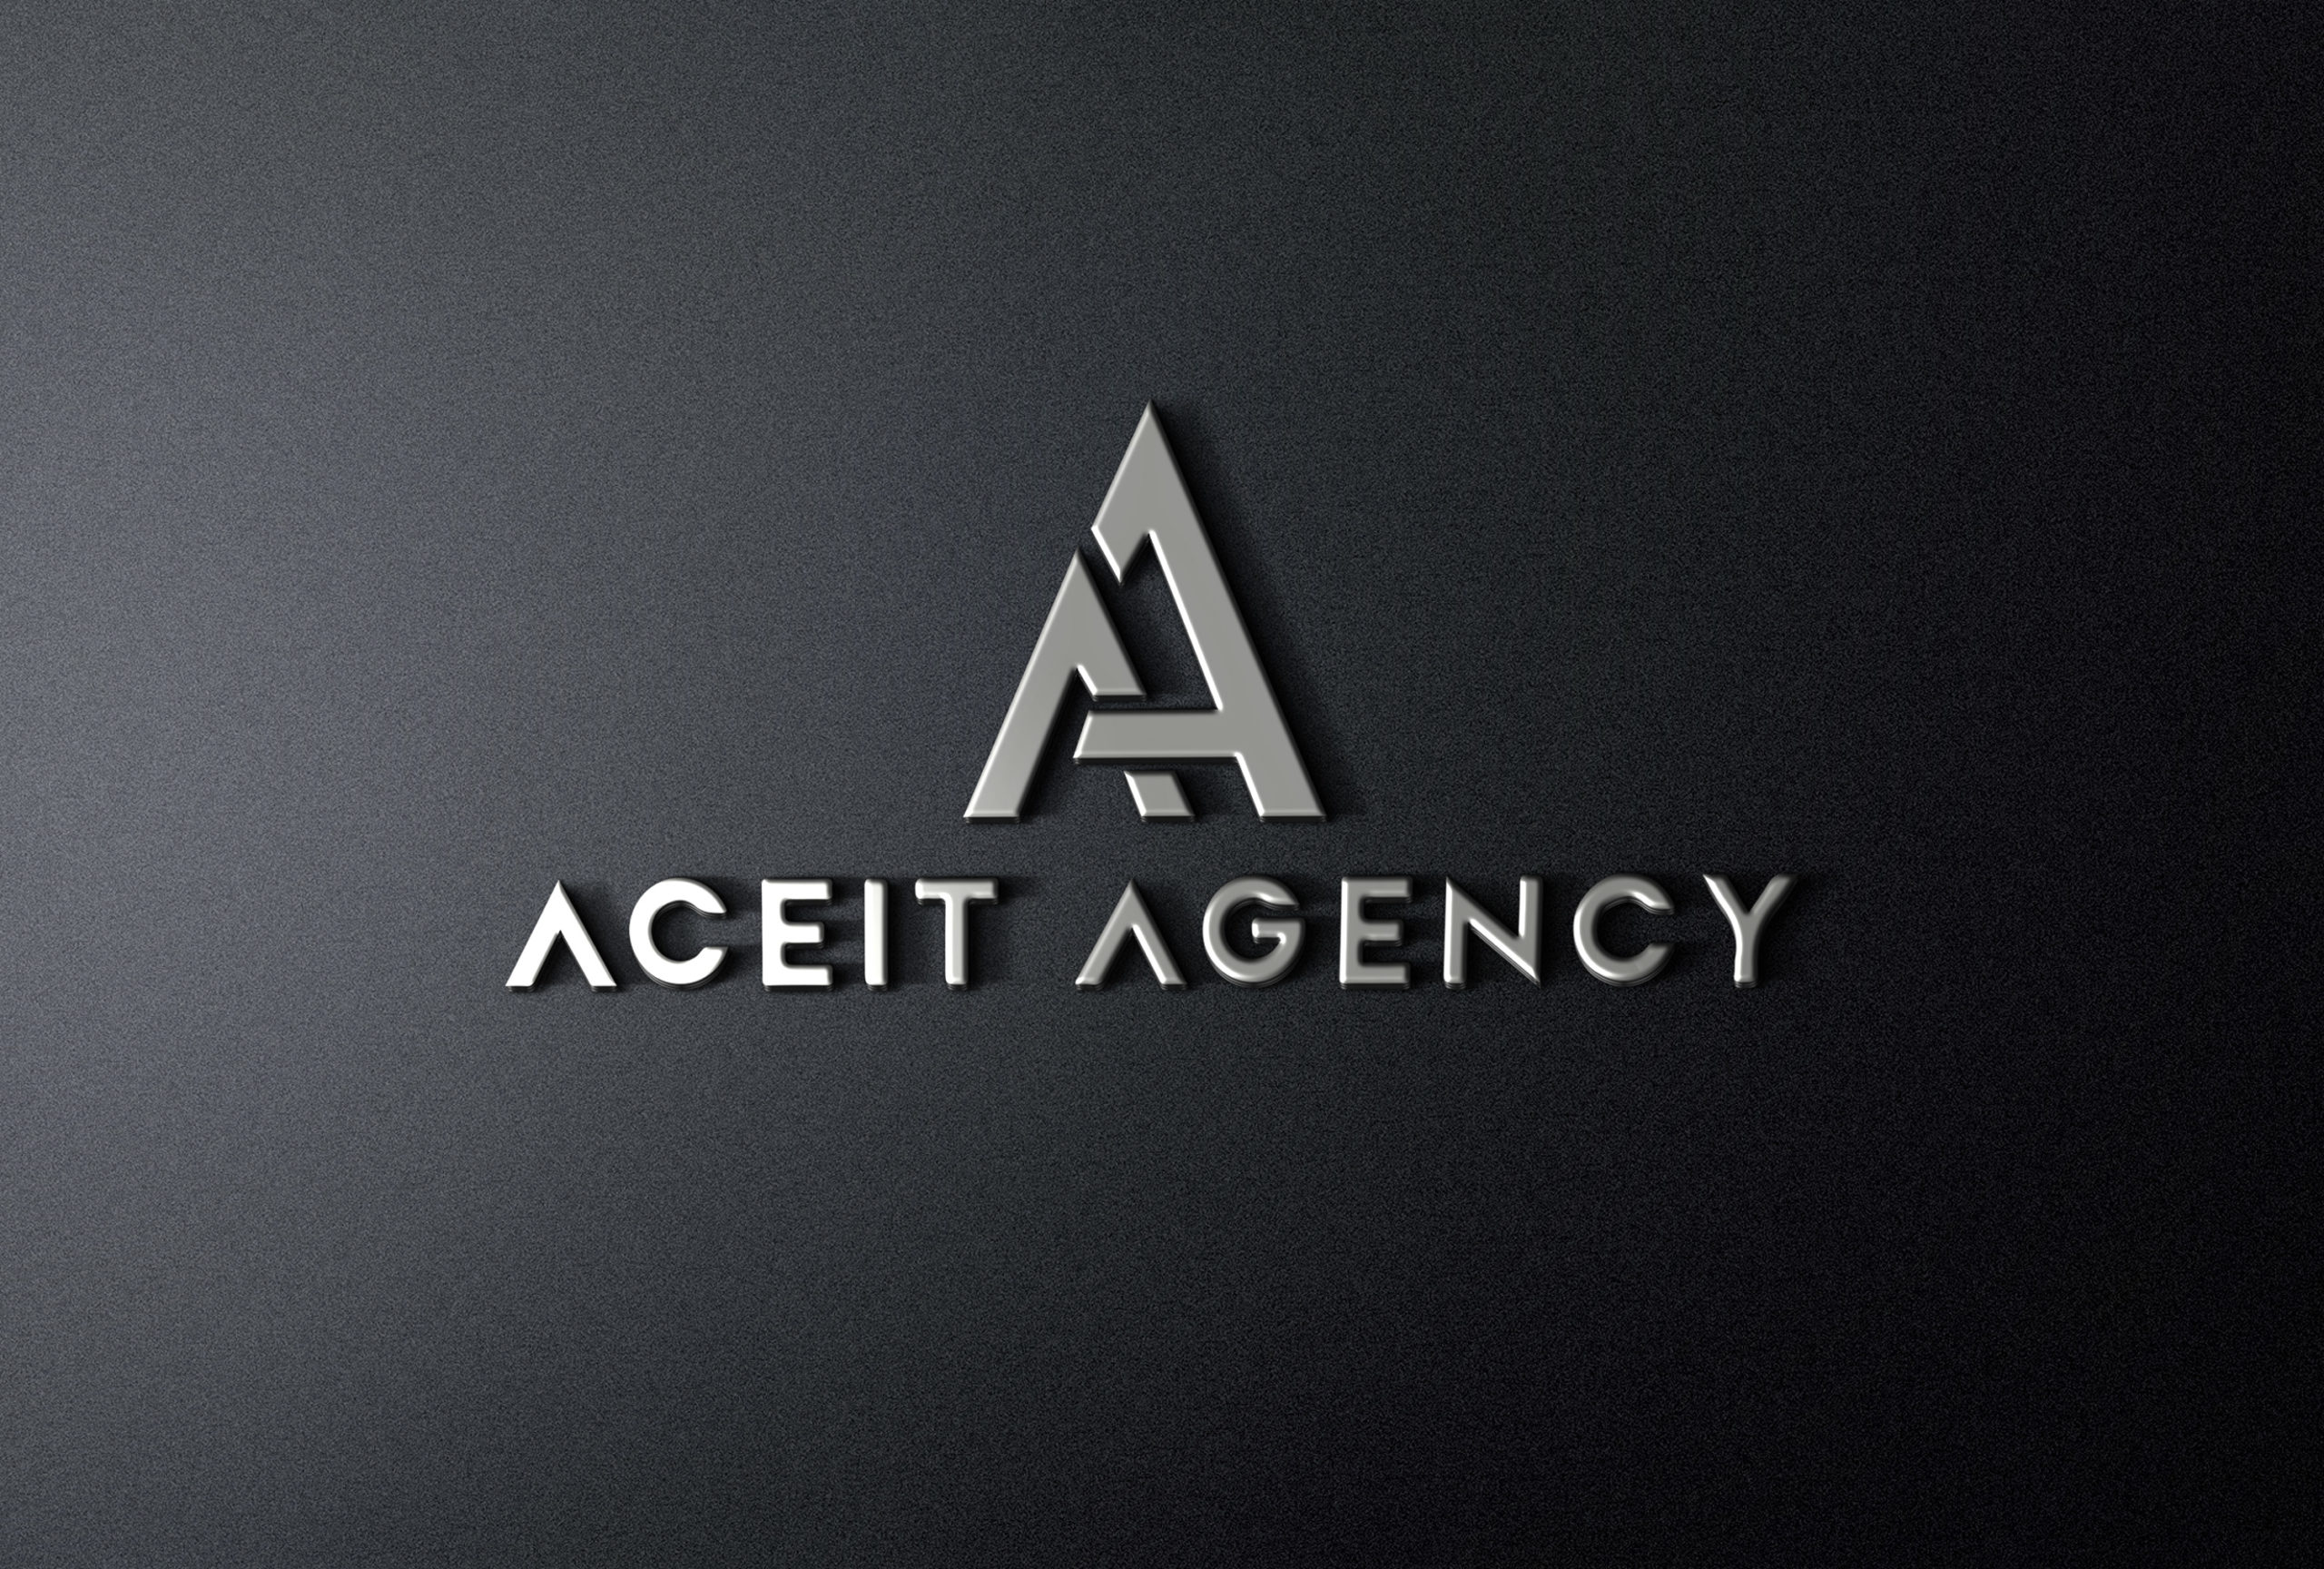 AceIt Agency's distinctive logo displayed prominently on the office wall, symbolizing a beacon of innovation and leadership in the PR industry.